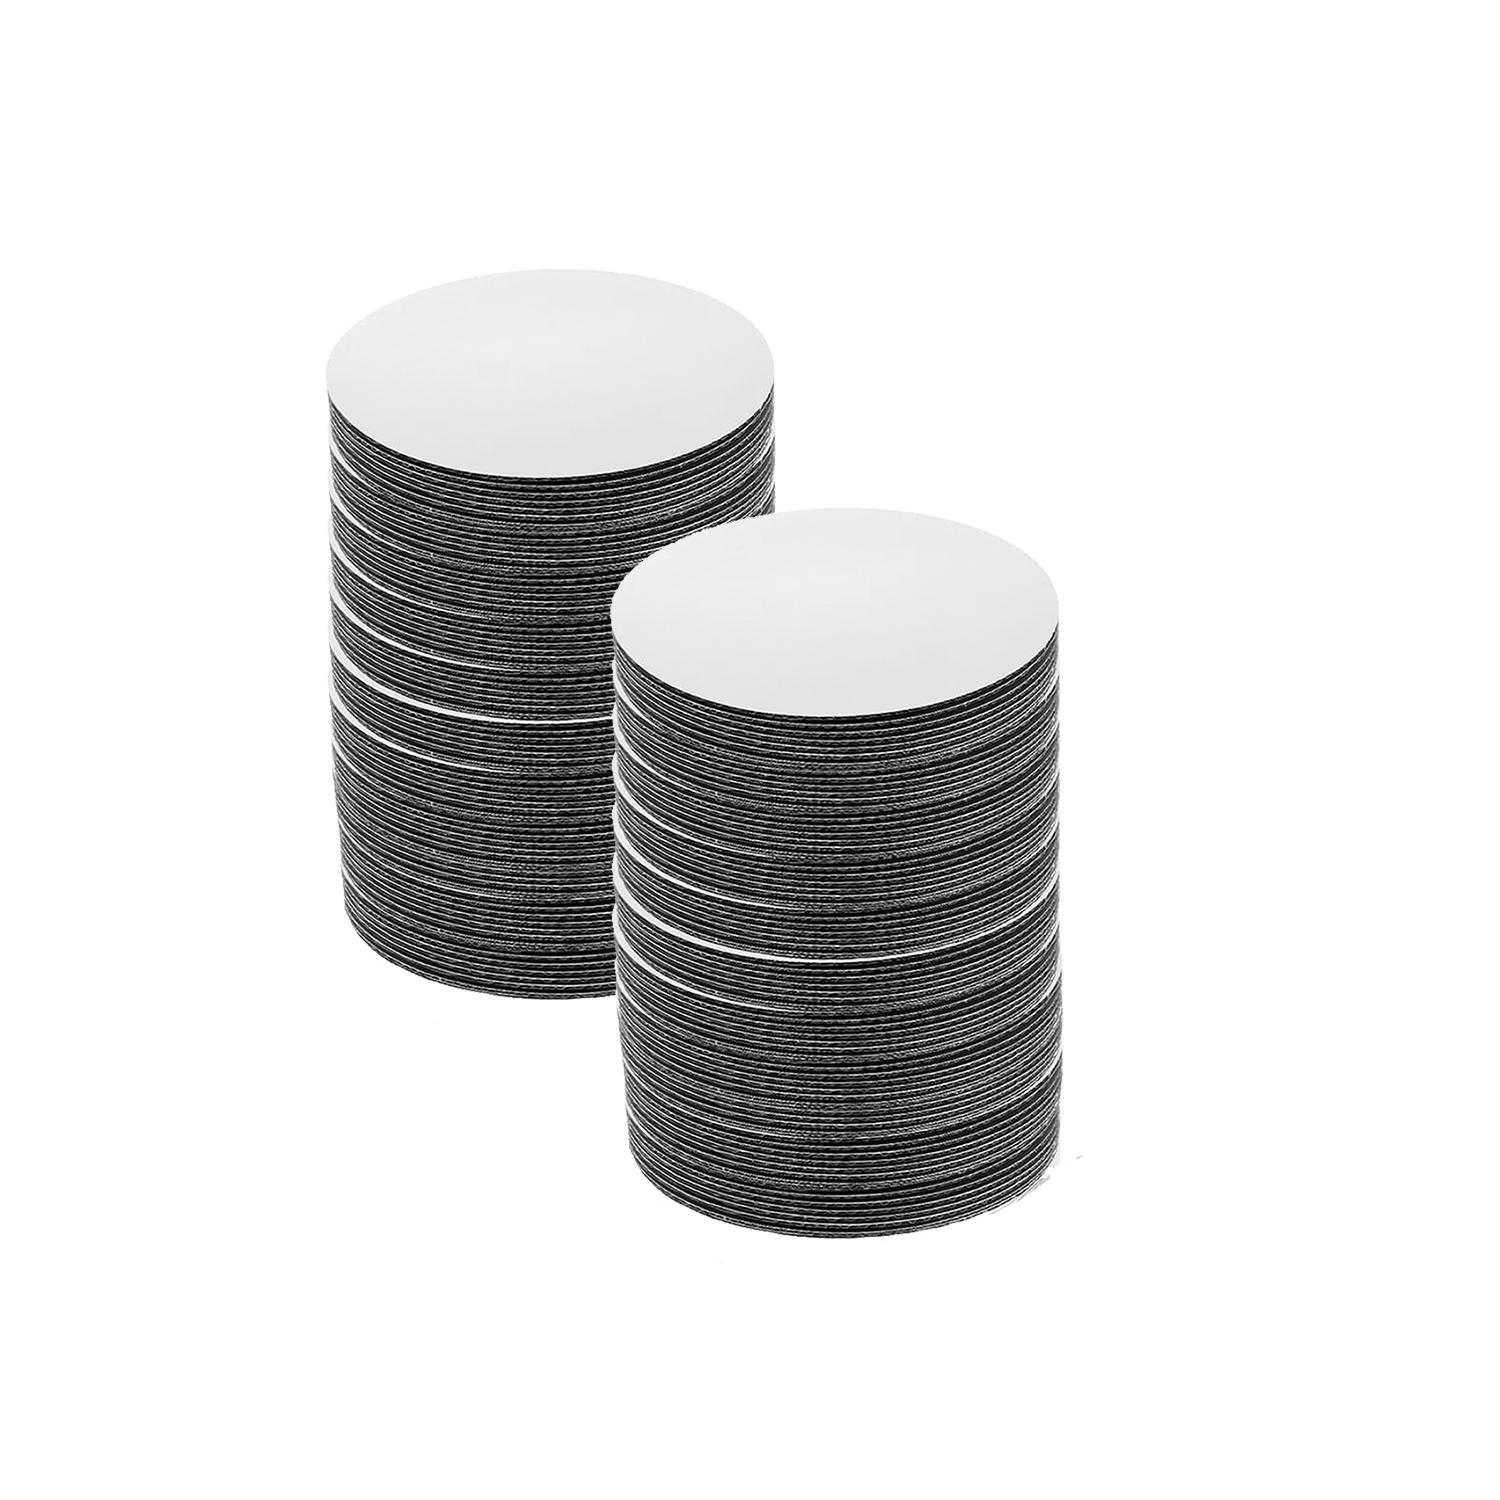 PACK OF 100 - 10'' ROUND SMOOTH SILVER CAKE BOARD